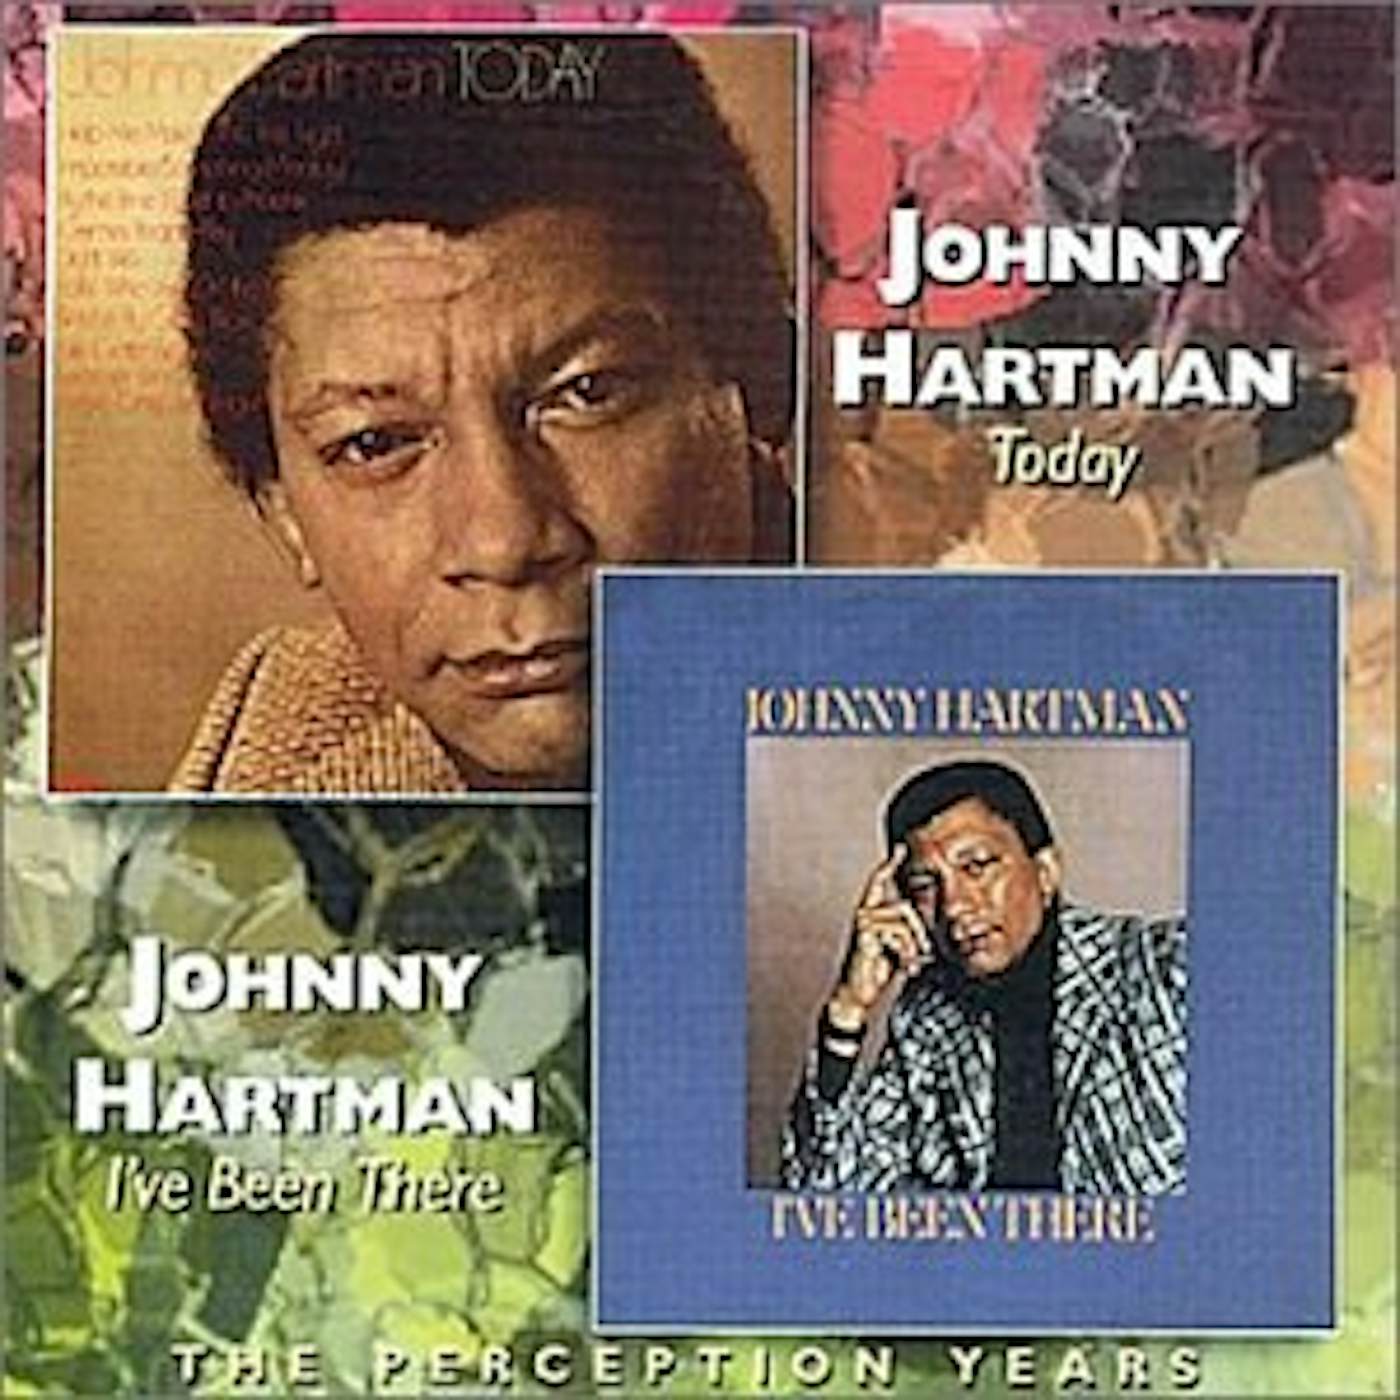 Johnny Hartman TODAY / I'VE BEEN THERE CD